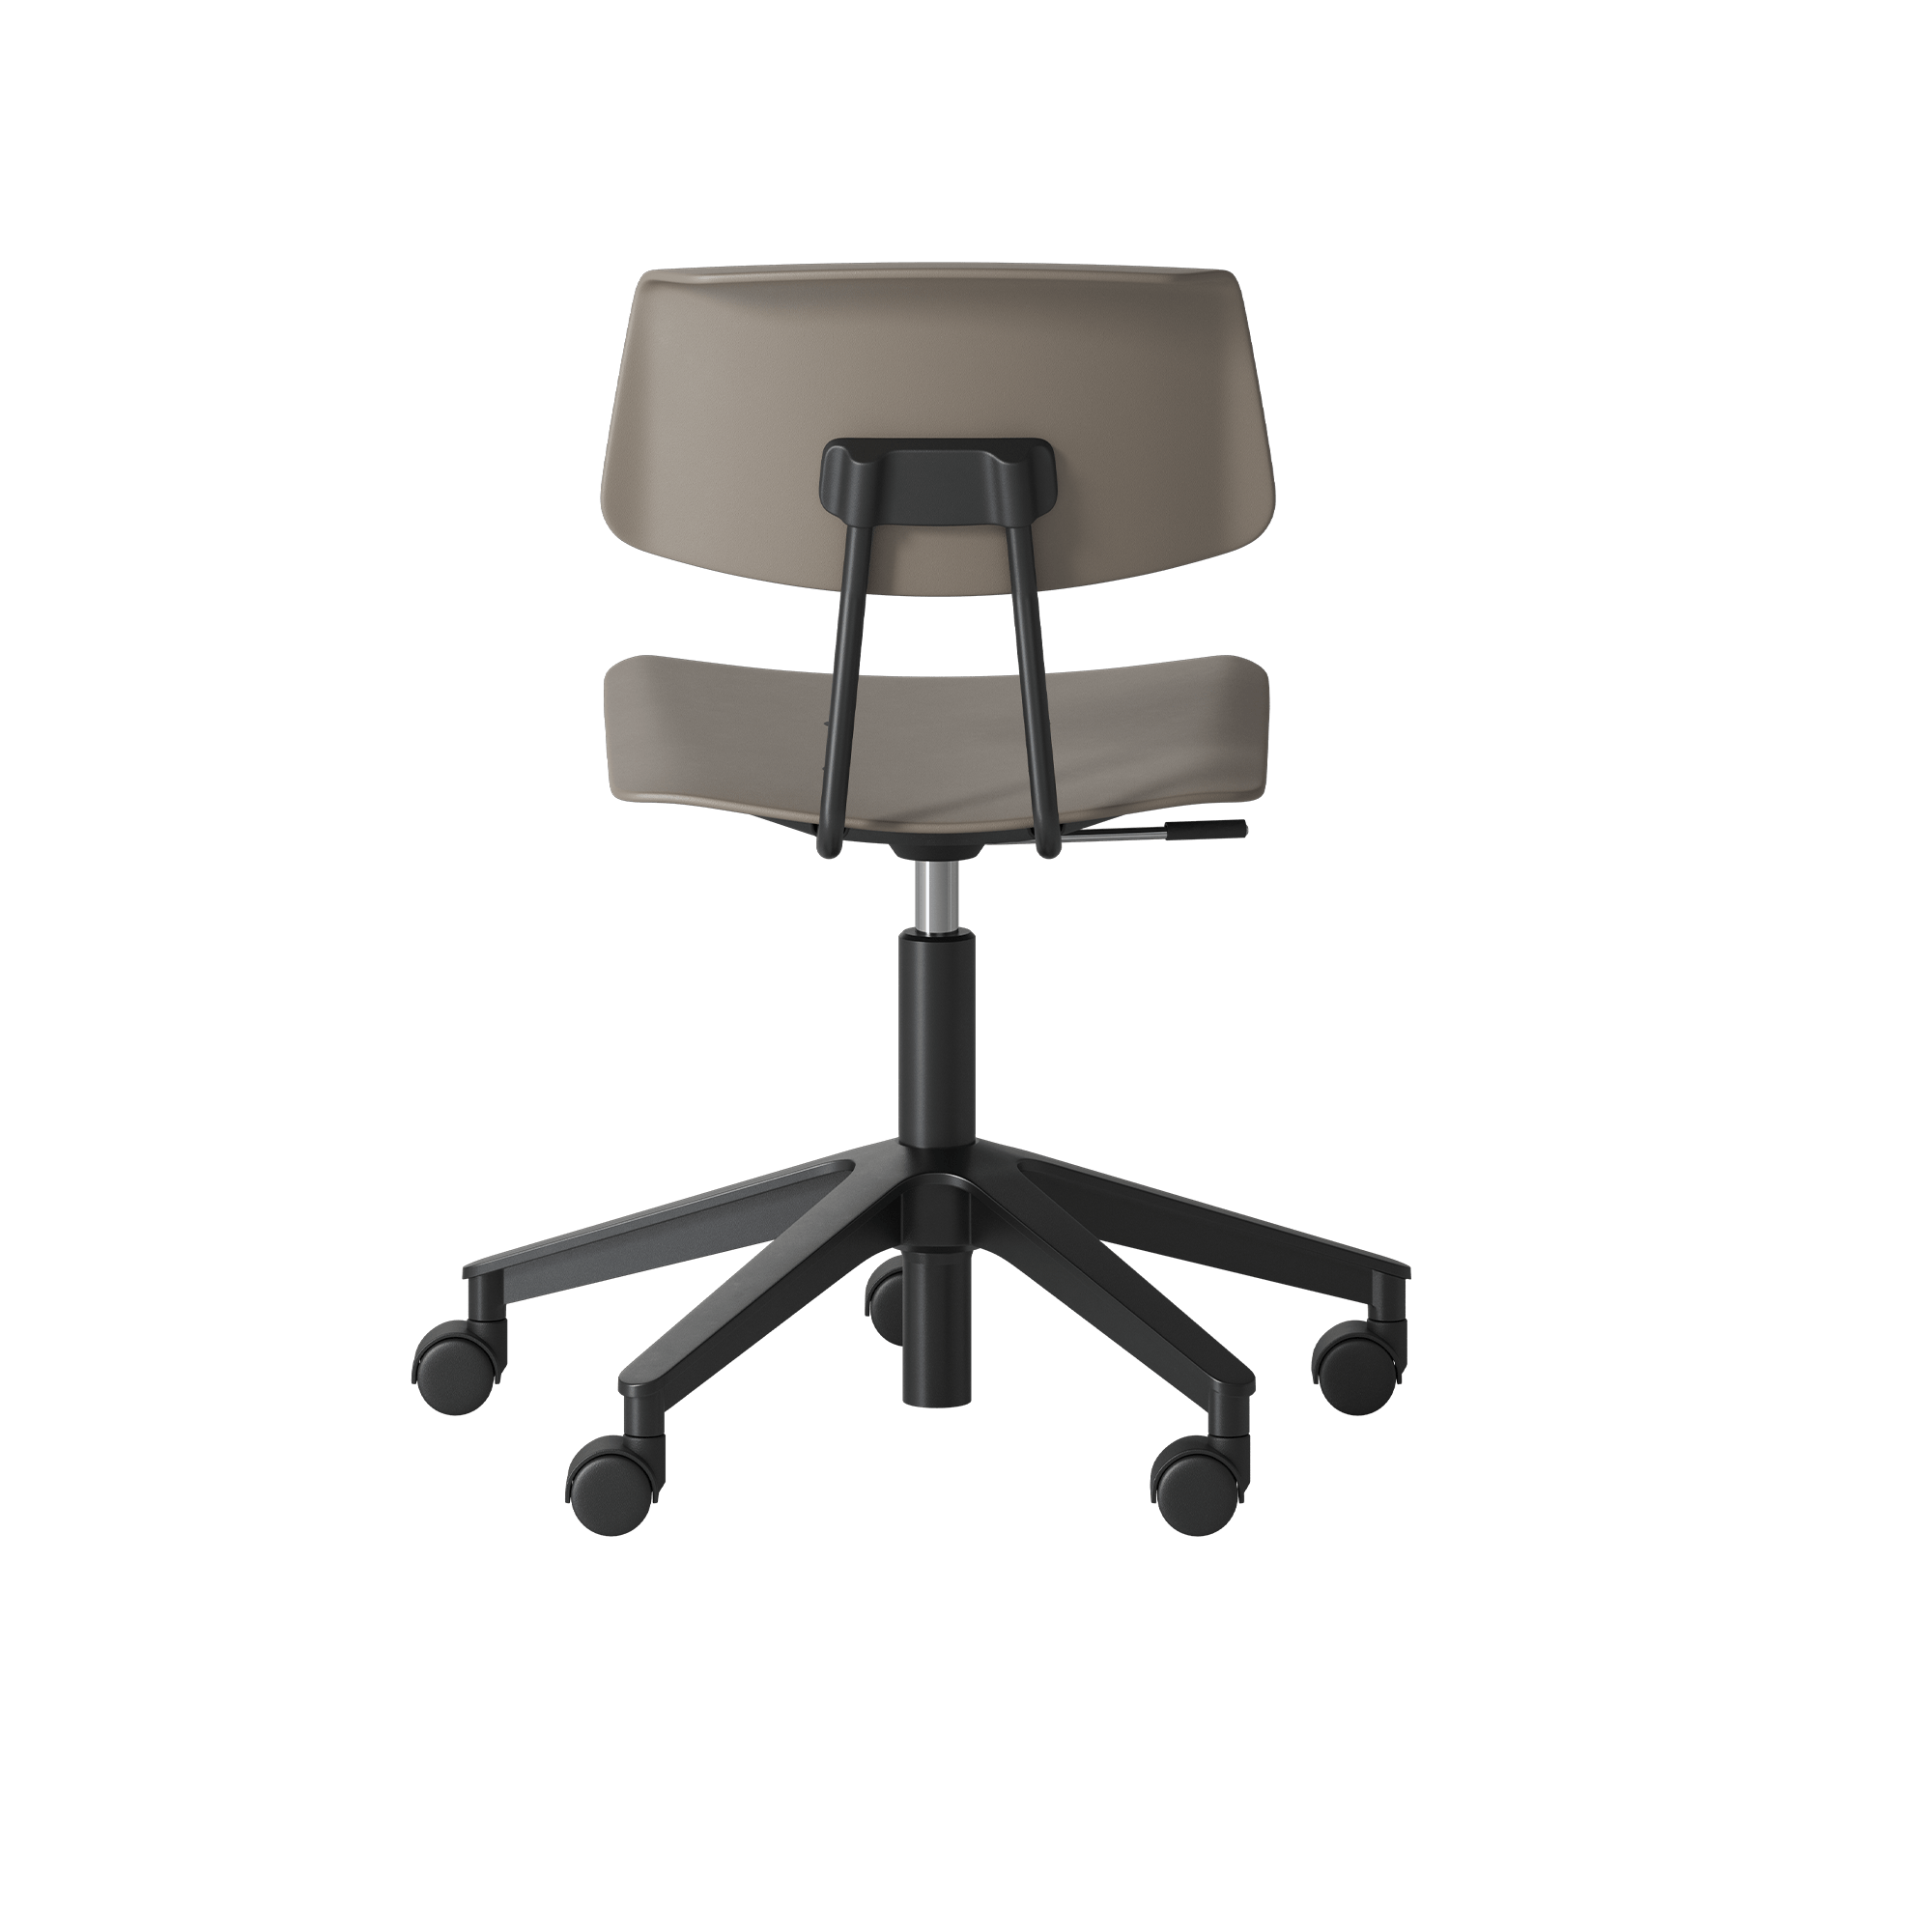 A Share Move 40 office desk chair